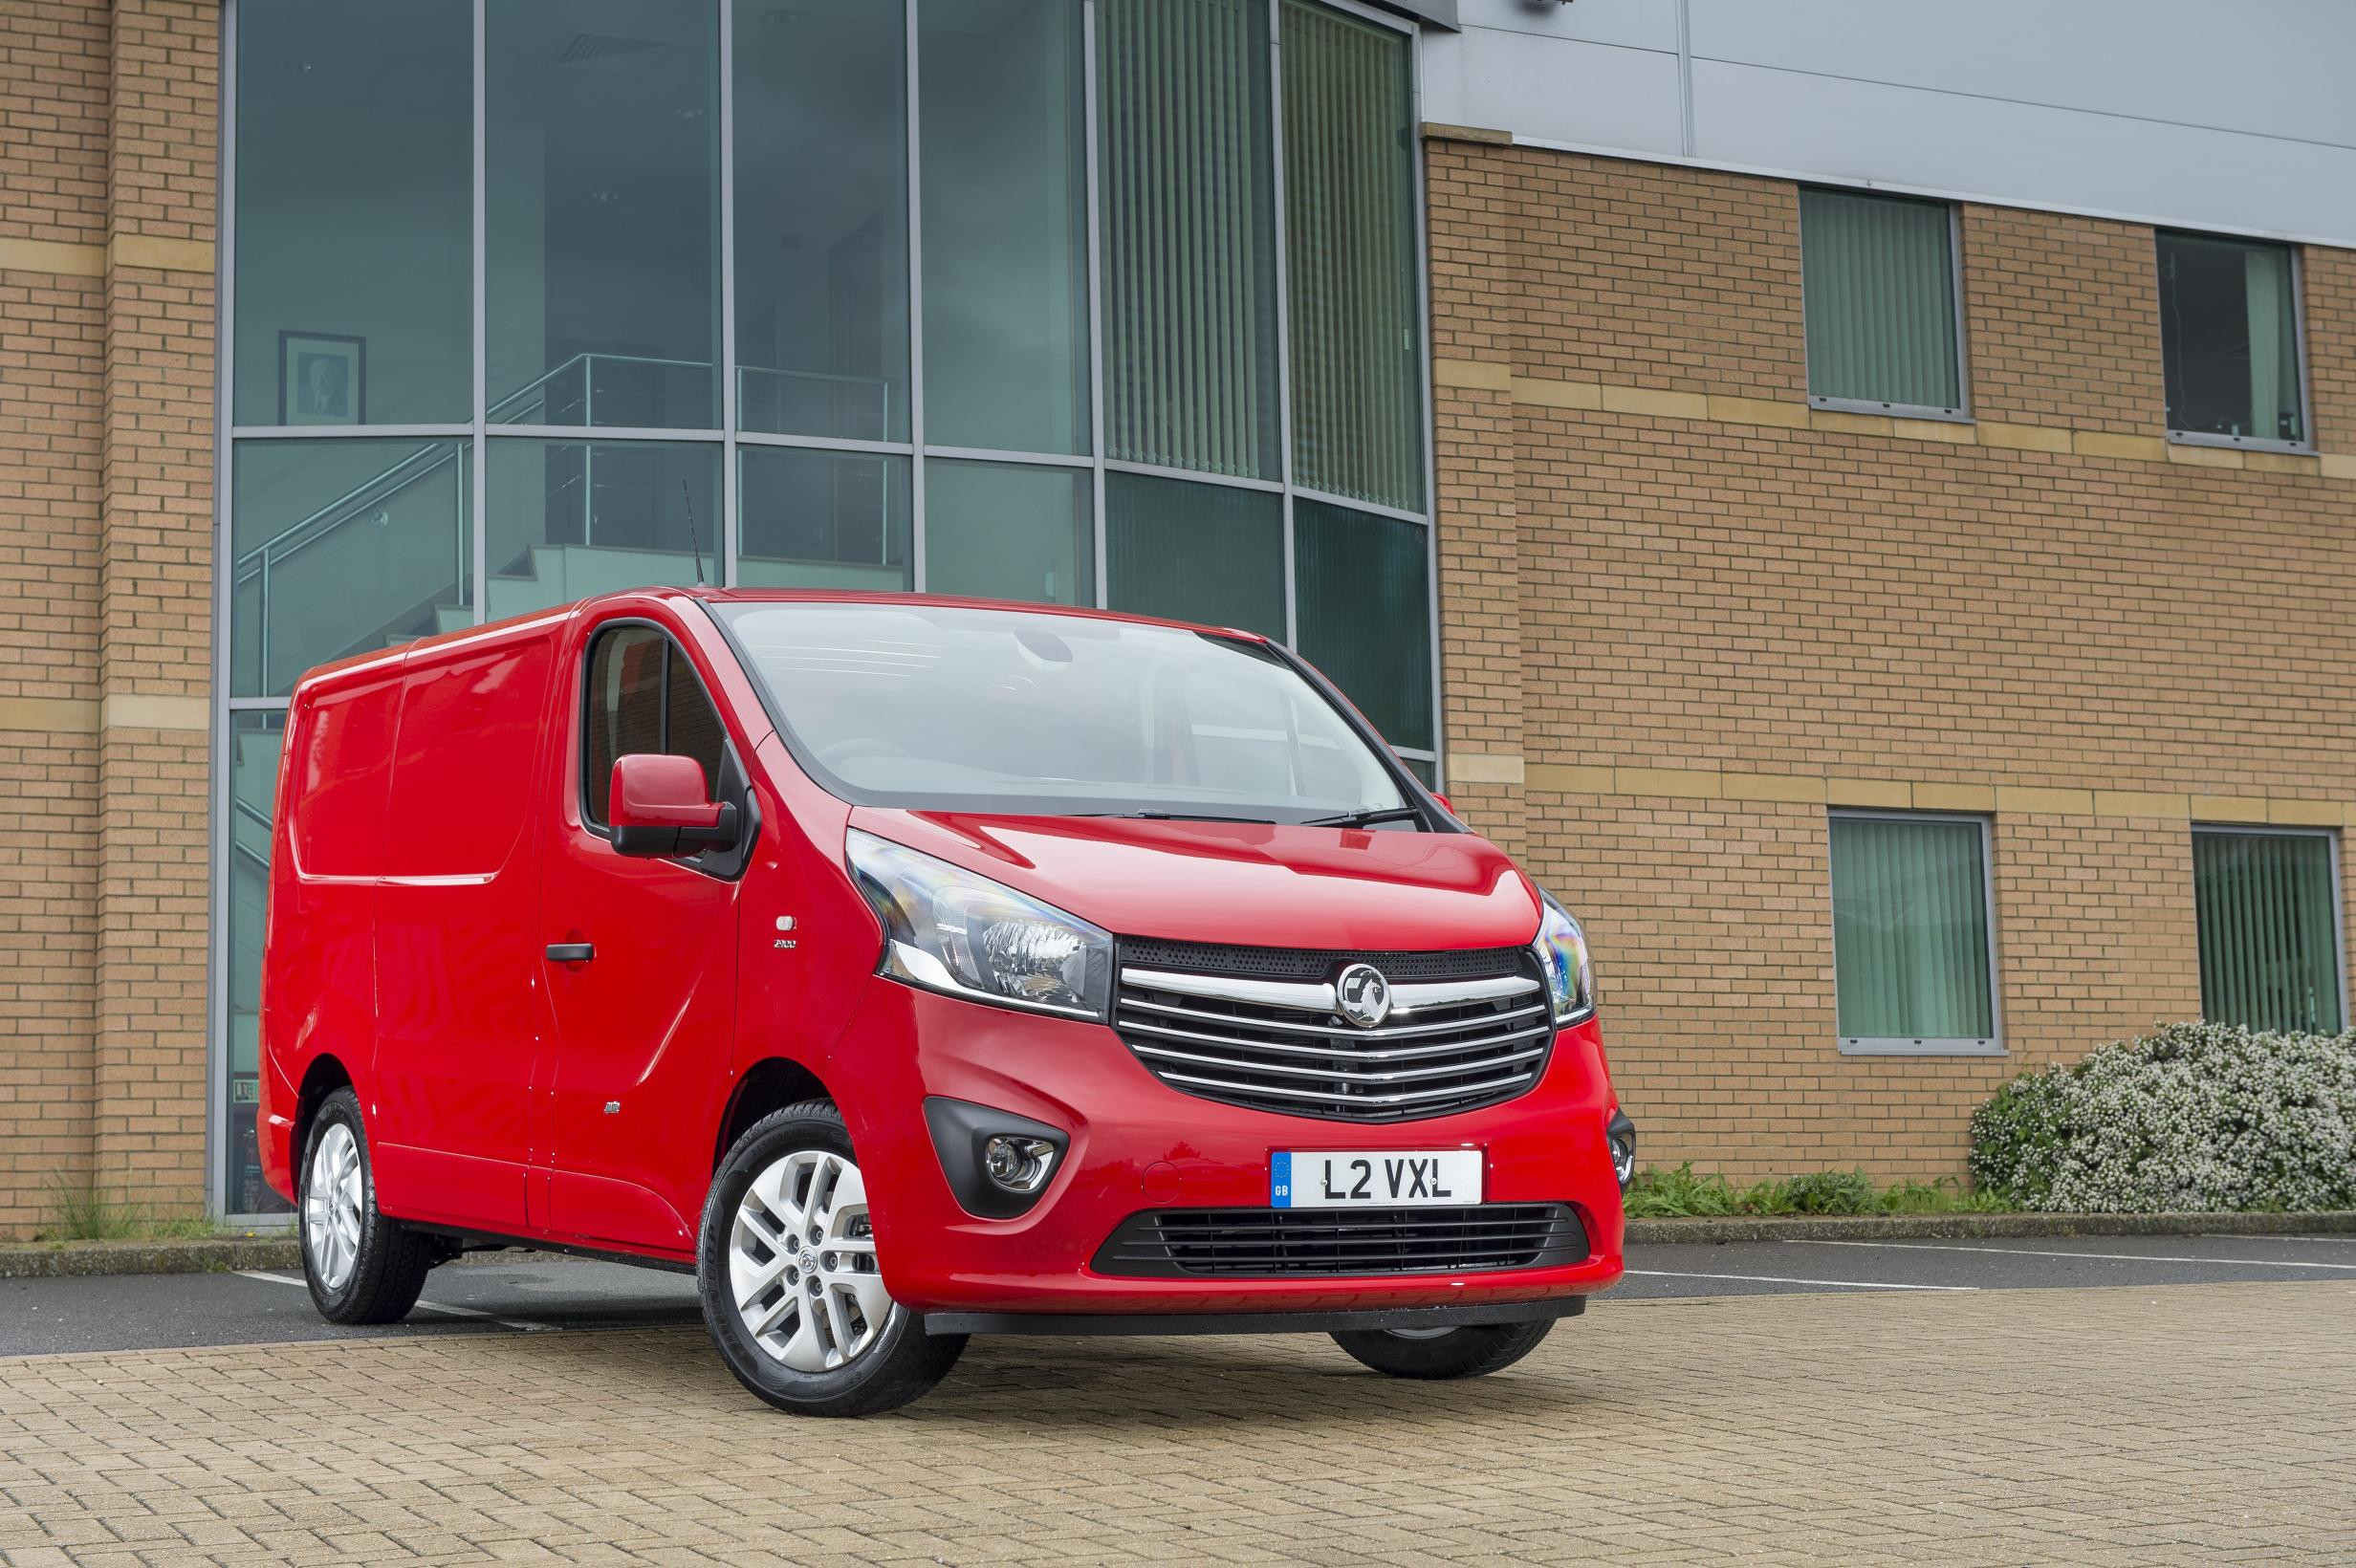 Red Vauxhall Vivaro parked in front of office unit, facing right